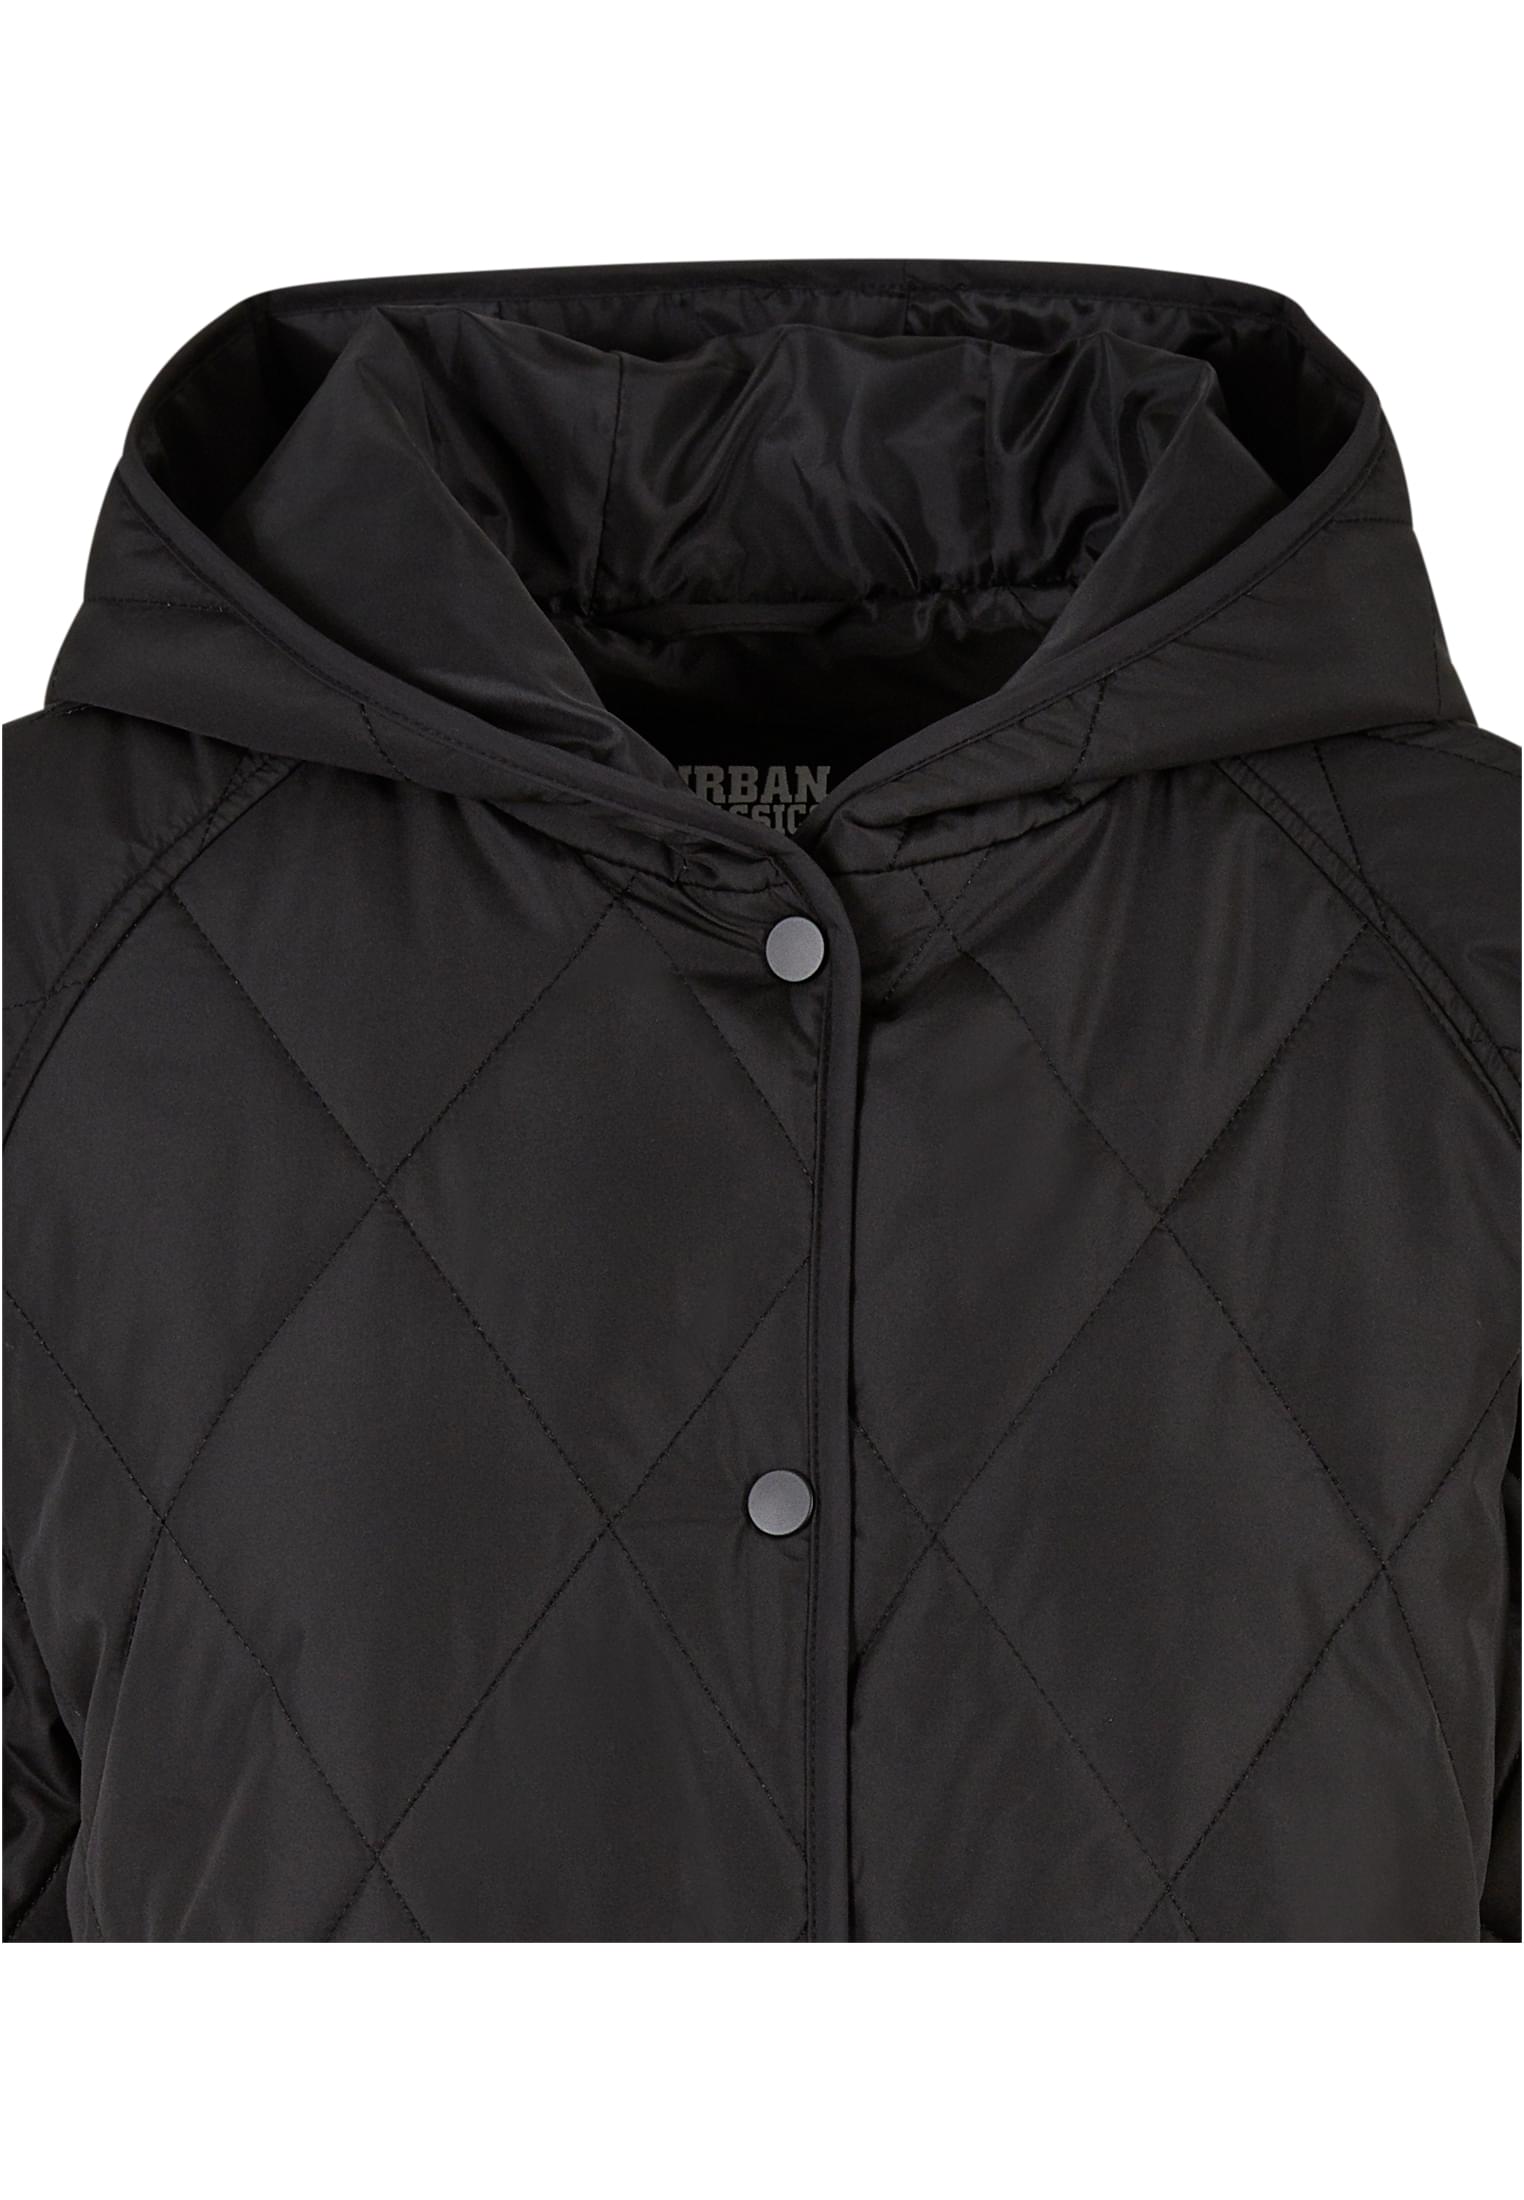 Ladies Oversized Diamond Quilted Hooded Jacket-TB6067